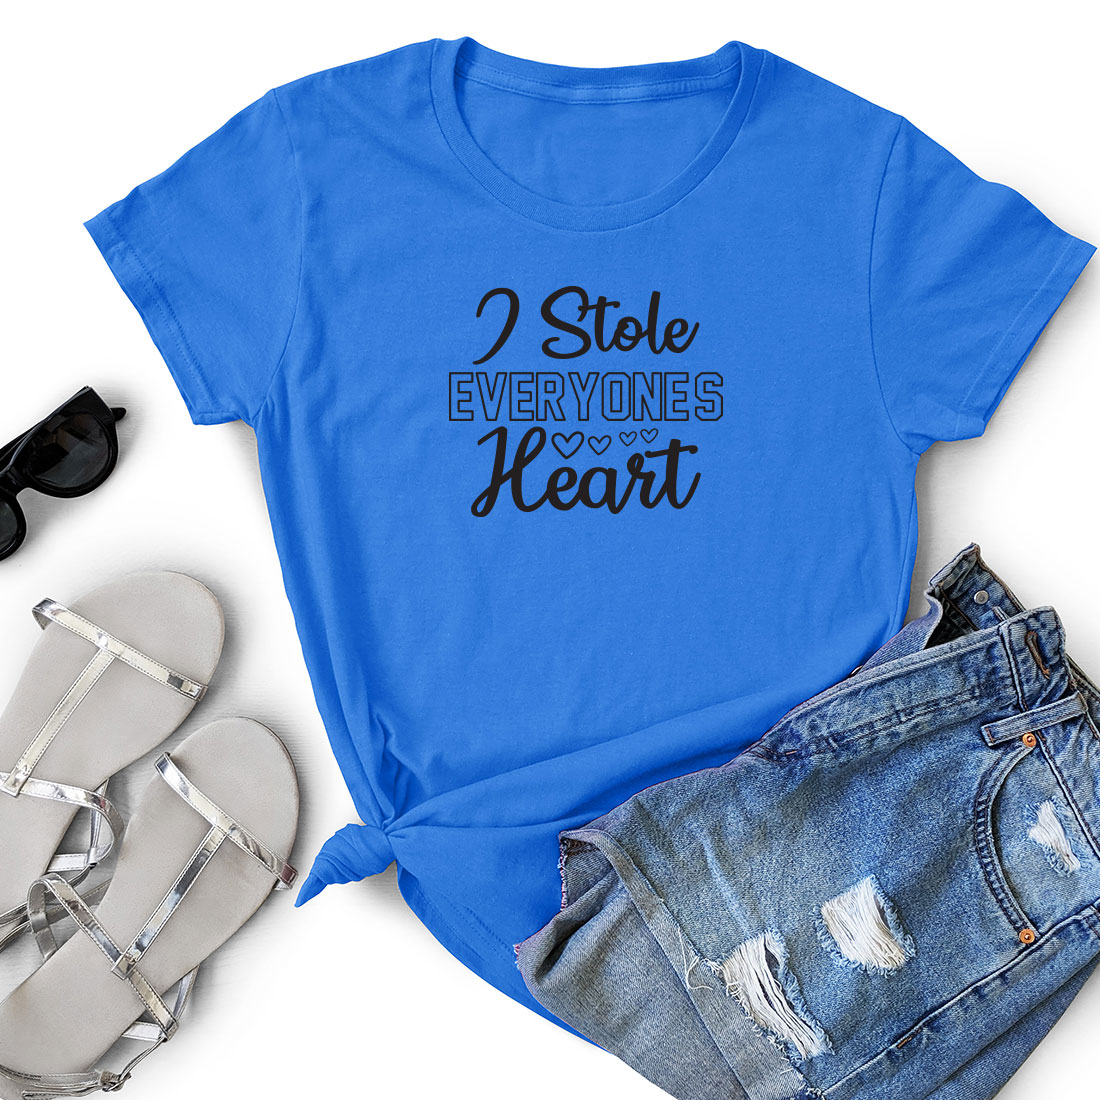 T - shirt that says i stole everyone's heart.